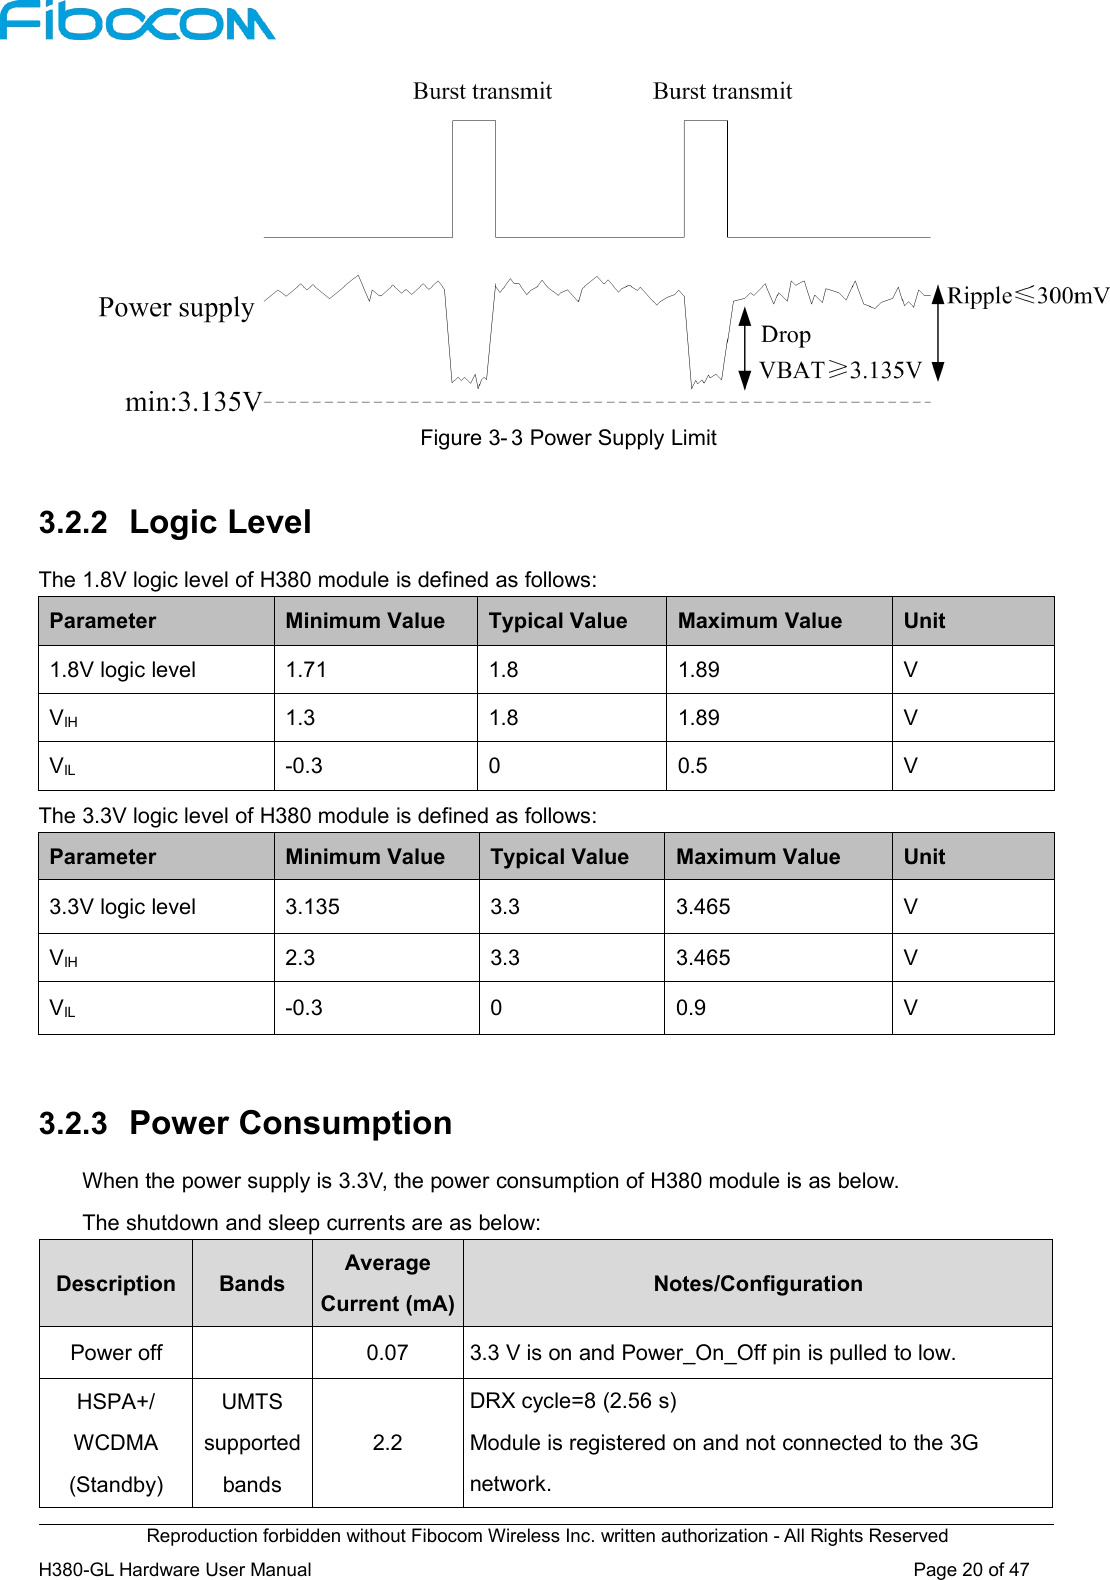 Reproduction forbidden without Fibocom Wireless Inc. written authorization - All Rights ReservedH380-GL Hardware User Manual Page20of47Figure 3- 3 Power Supply Limit3.2.2 Logic LevelThe 1.8V logic level of H380 module is defined as follows:ParameterMinimum ValueTypical ValueMaximum ValueUnit1.8V logic level1.711.81.89VVIH1.31.81.89VVIL-0.300.5VThe 3.3V logic level of H380 module is defined as follows:ParameterMinimum ValueTypical ValueMaximum ValueUnit3.3V logic level3.1353.33.465VVIH2.33.33.465VVIL-0.300.9V3.2.3 Power ConsumptionWhen the power supply is 3.3V, the power consumption of H380 module is as below.The shutdown and sleep currents are as below:DescriptionBandsAverageCurrent (mA)Notes/ConfigurationPower off0.073.3 V is on and Power_On_Off pin is pulled to low.HSPA+/WCDMA(Standby)UMTSsupportedbands2.2DRX cycle=8 (2.56 s)Module is registered on and not connected to the 3Gnetwork.